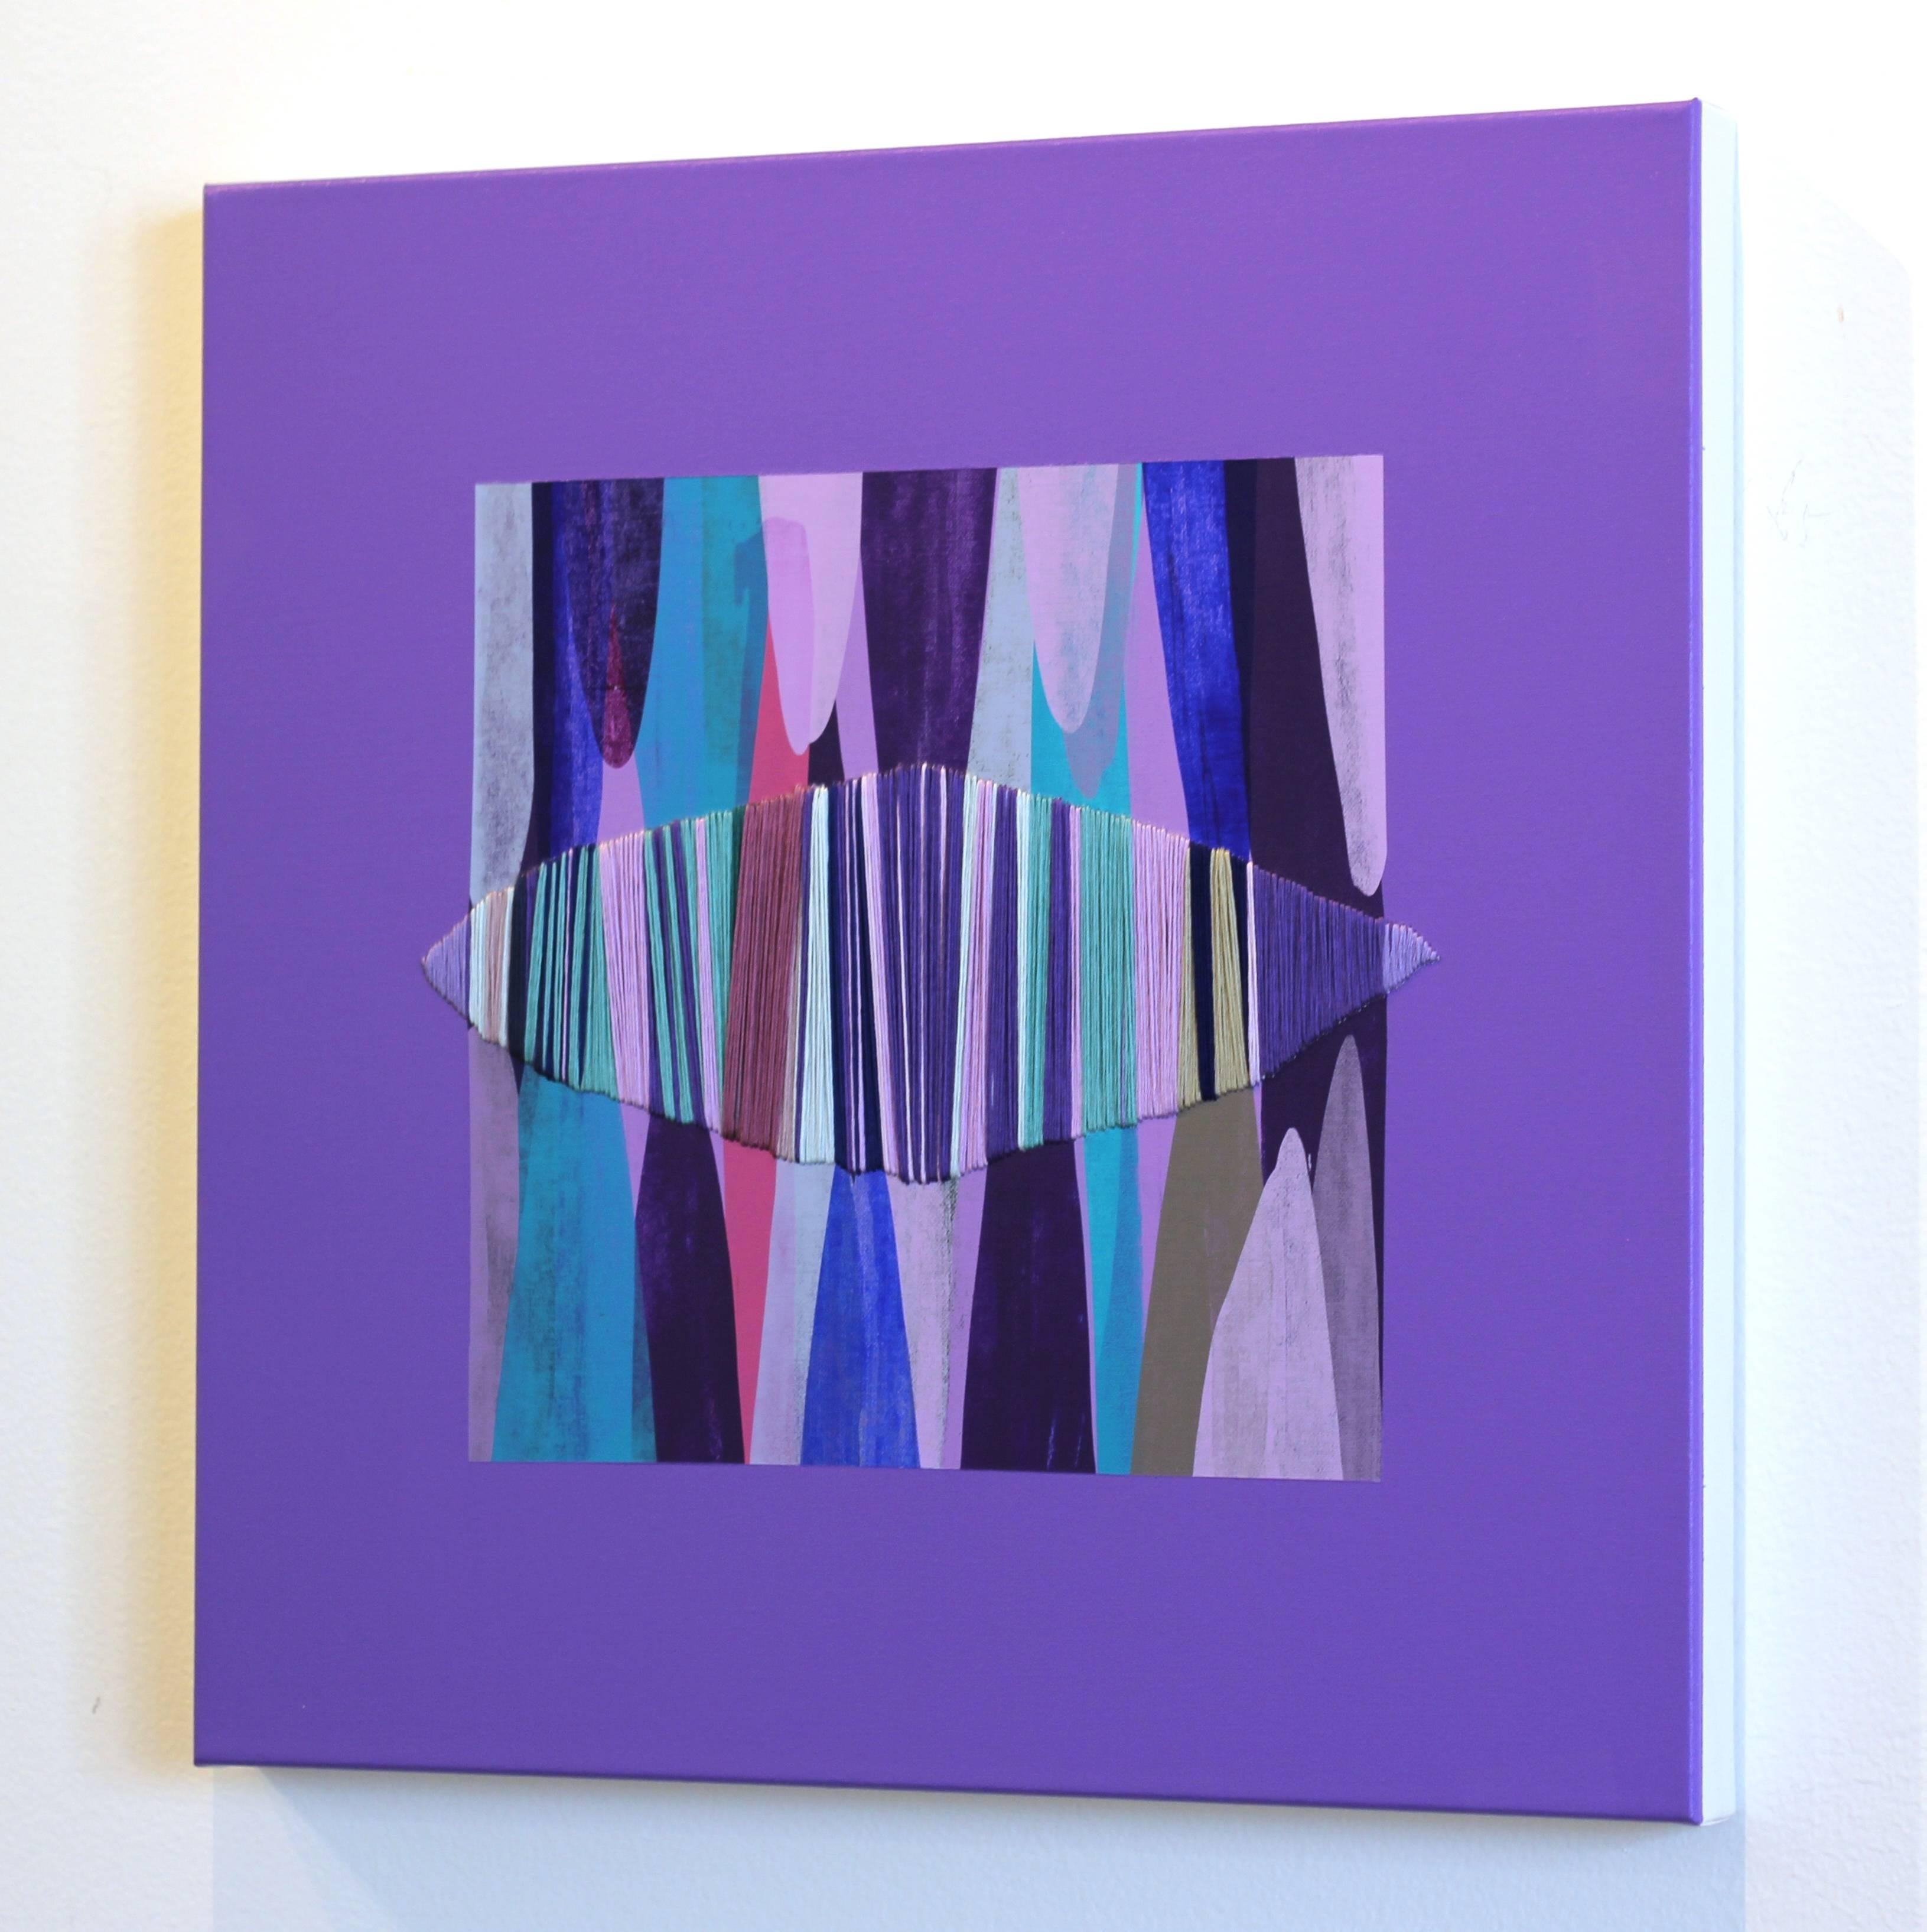 Poemes XLV - Abstract Painting by Raul de la Torre